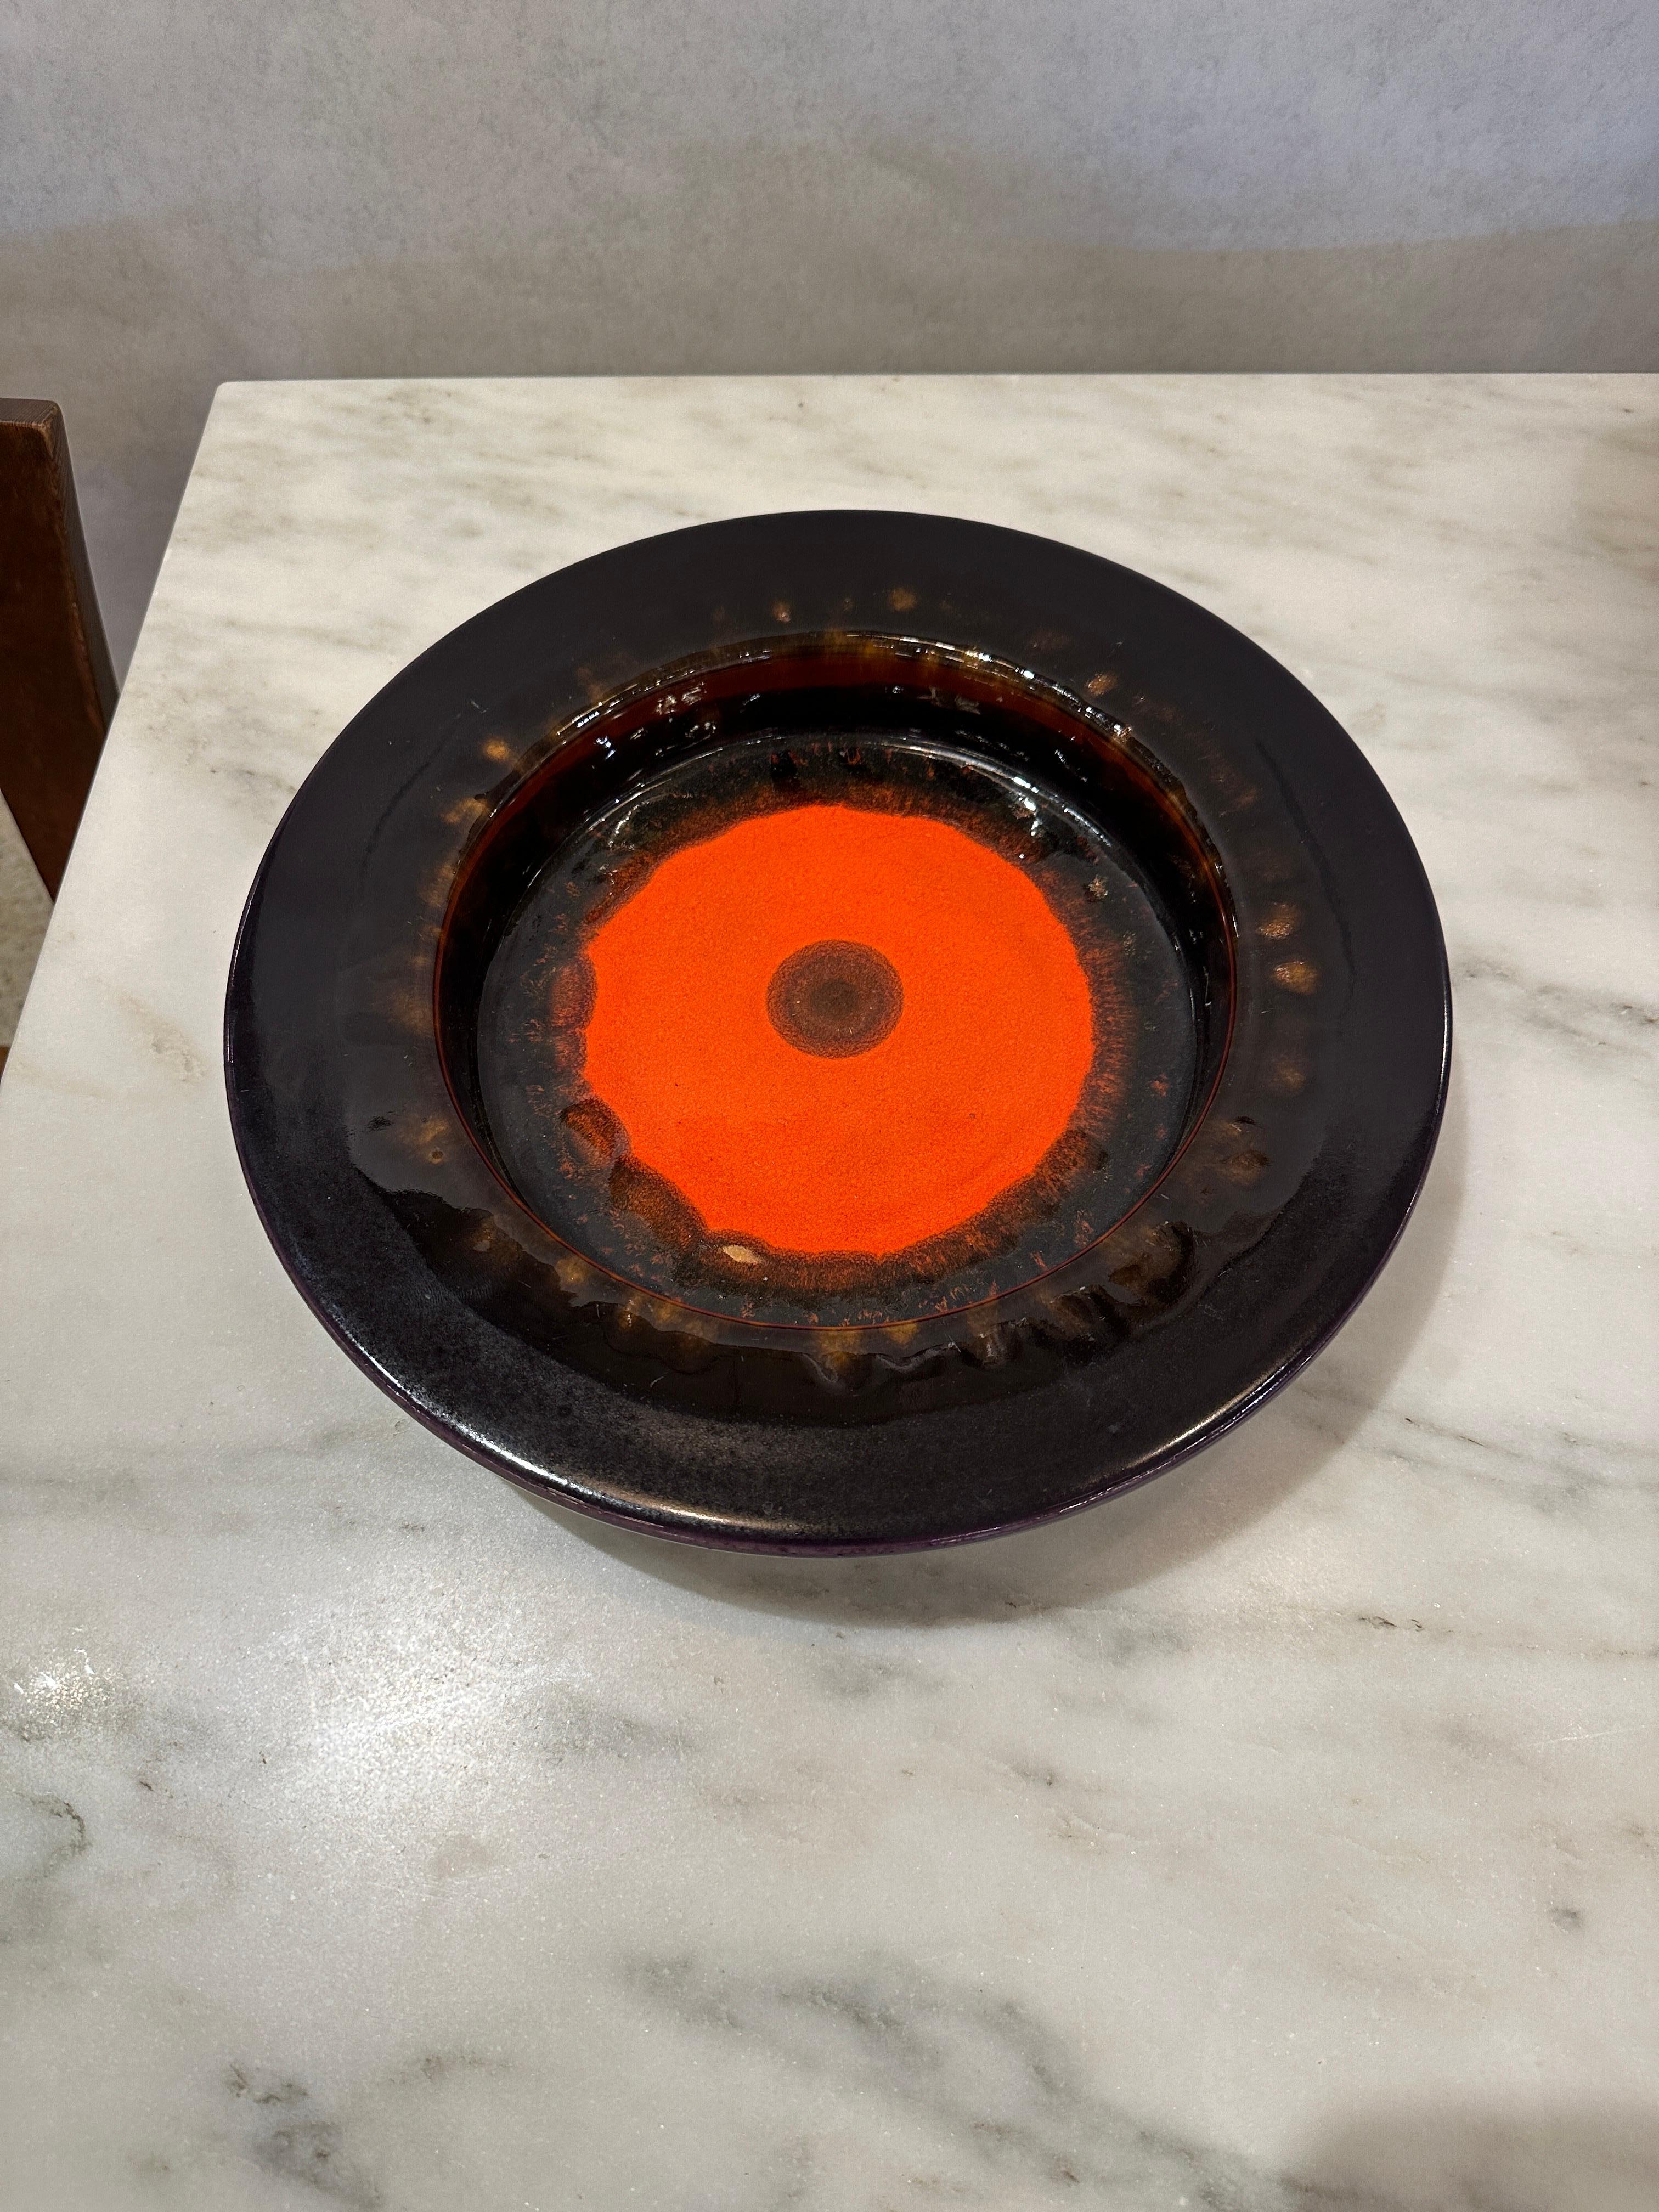 This wide lipped glazed ceramic West German bowl features vivid orange central coloring surrounded by a rich eggplant tone.  THIS ITEM IS LOCATED AND WILL SHIP FROM OUR MIAMI, FLORIDA SHOWROOM.